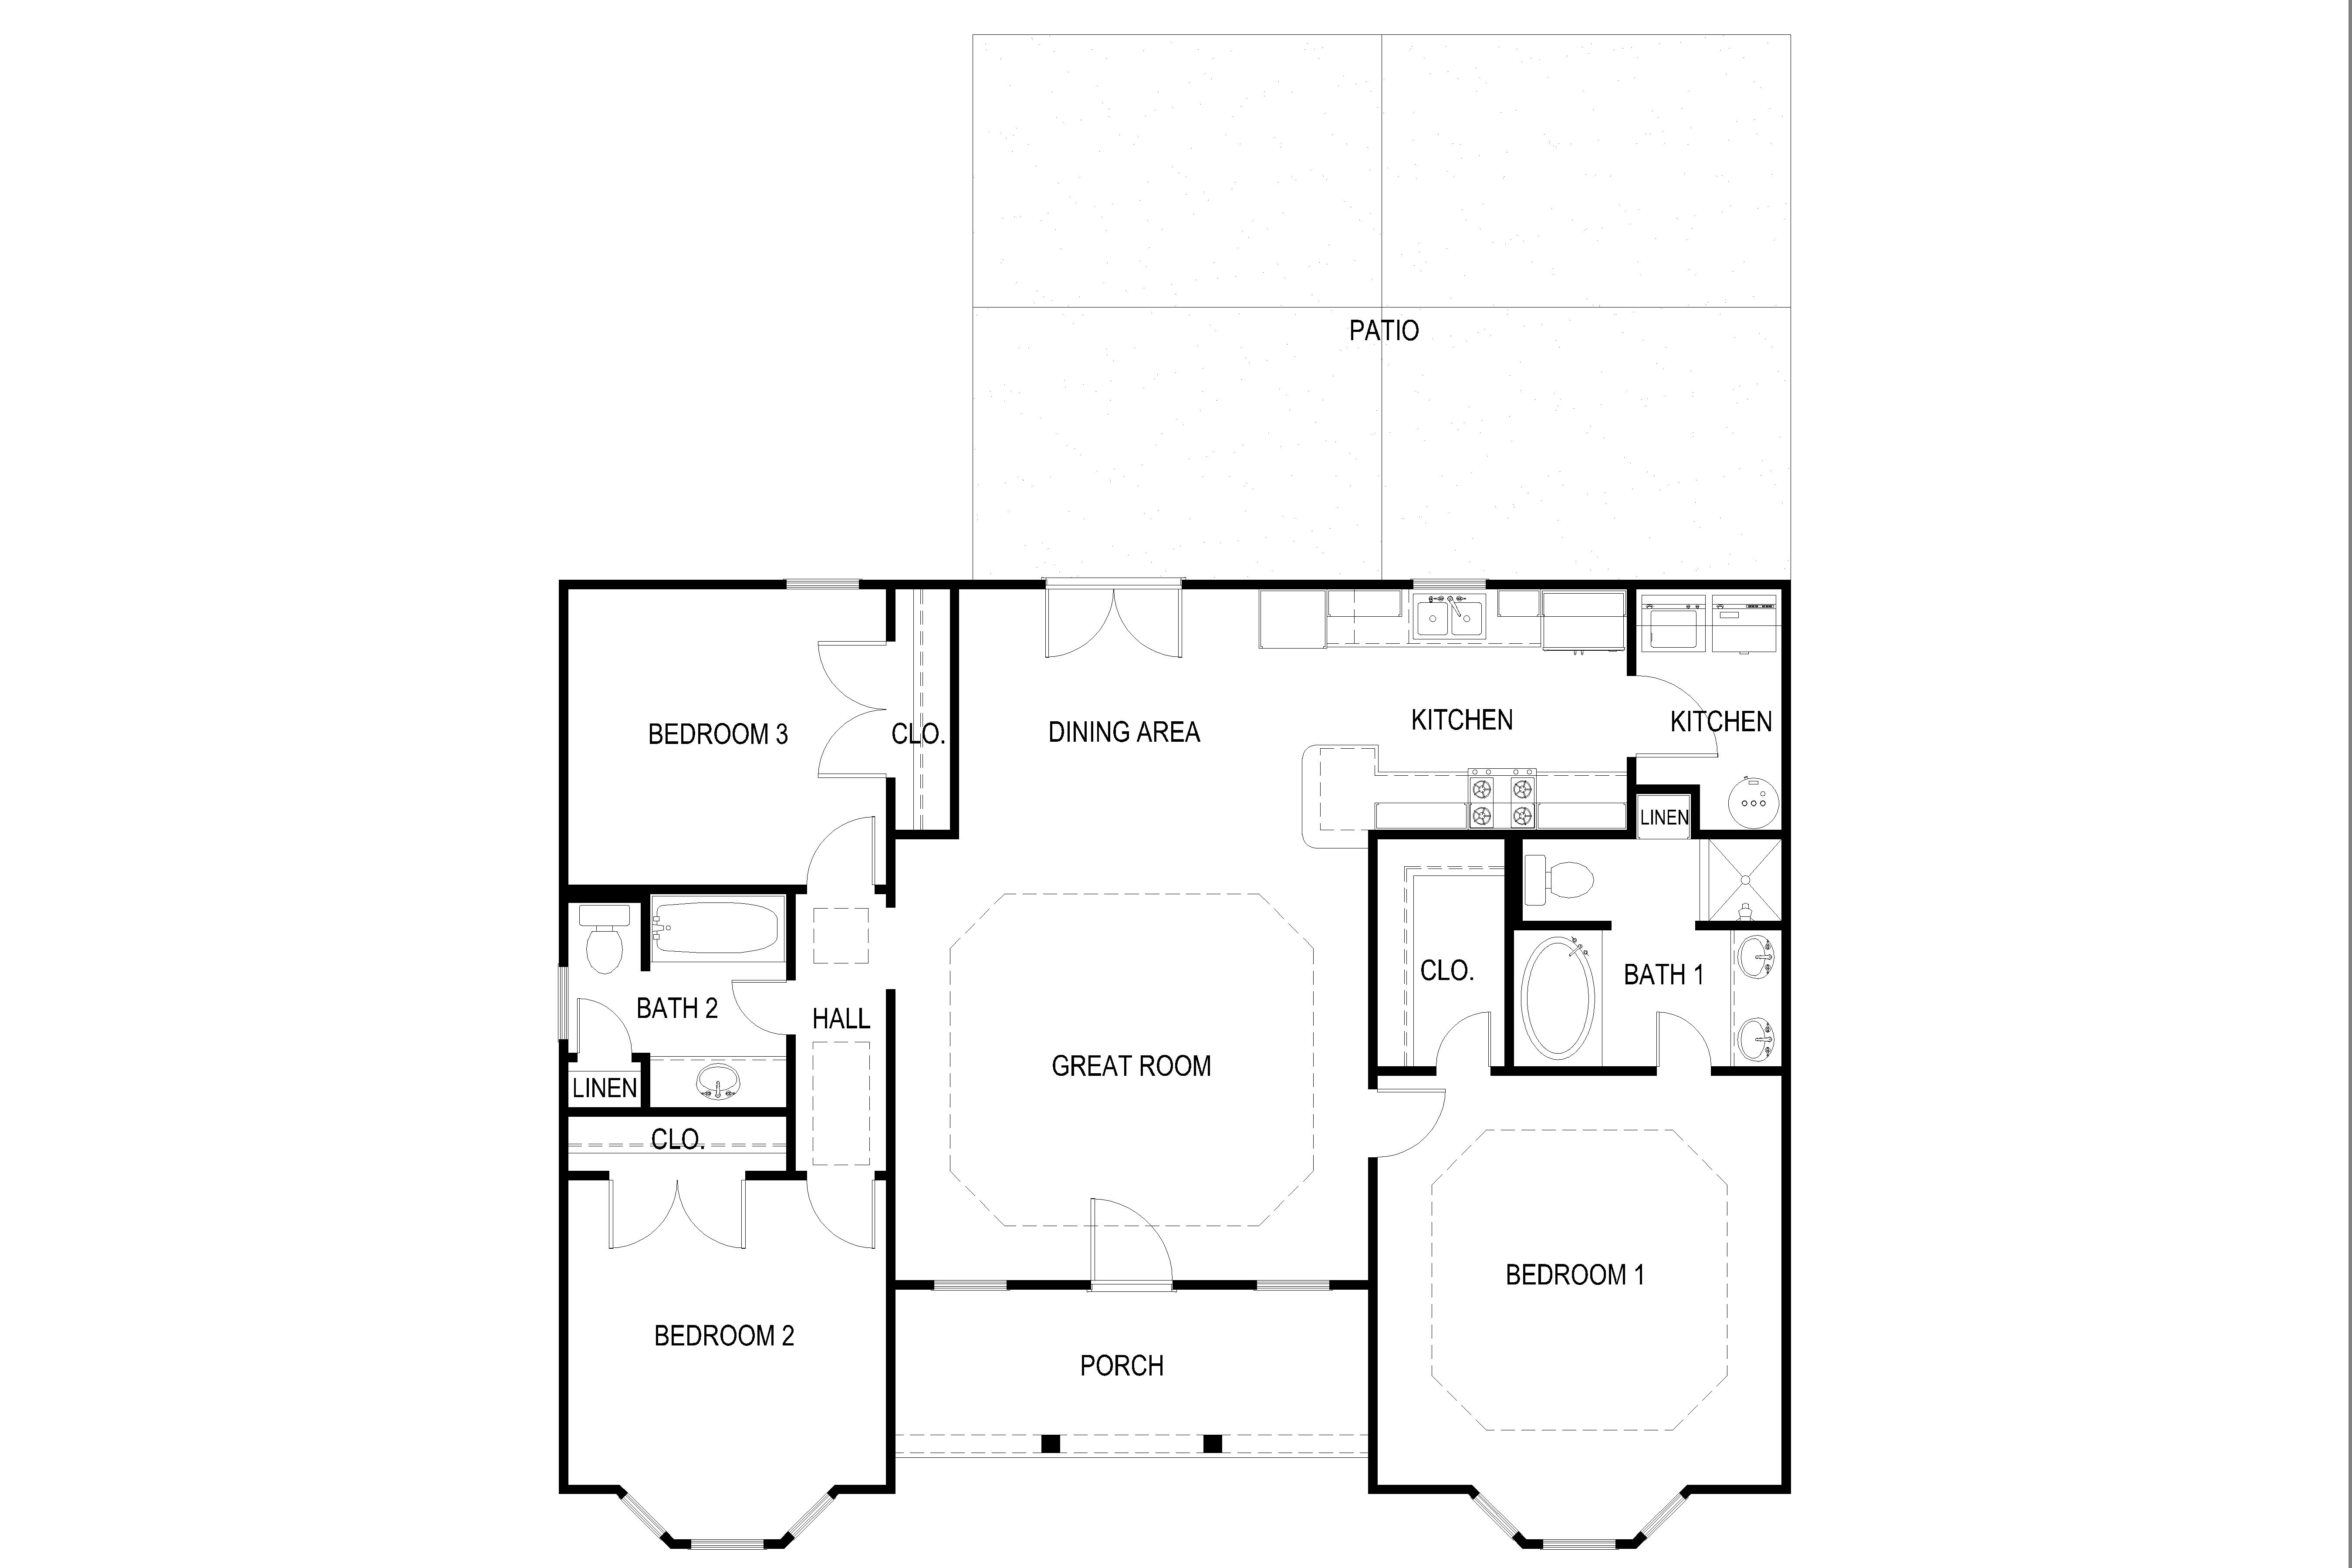 Small House Plan Under 2000 sq ft 3 Bedroom 2 Bath